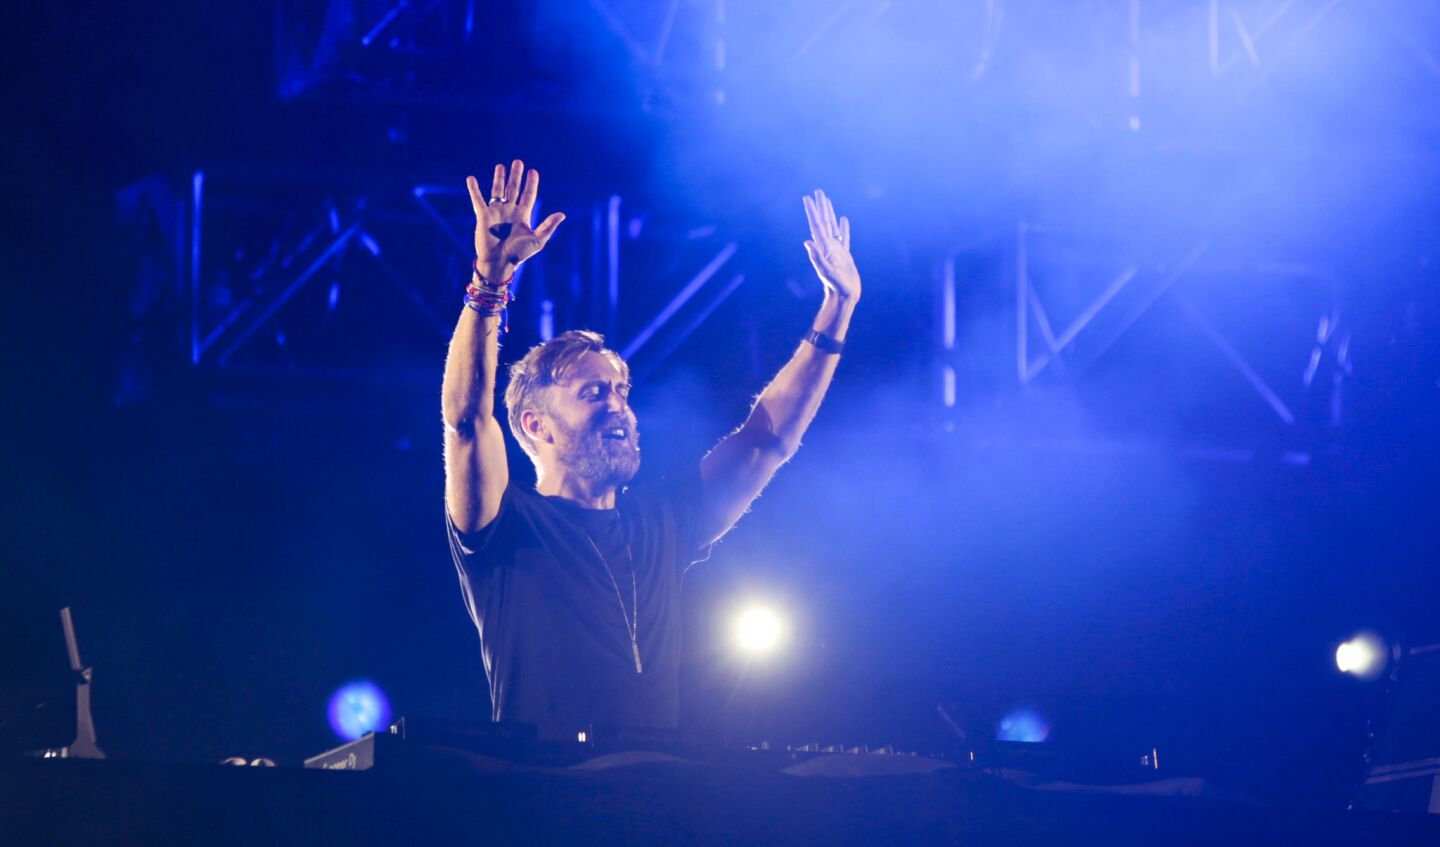 DJ David Guetta waves to the crowd while playing music during KAABOO.